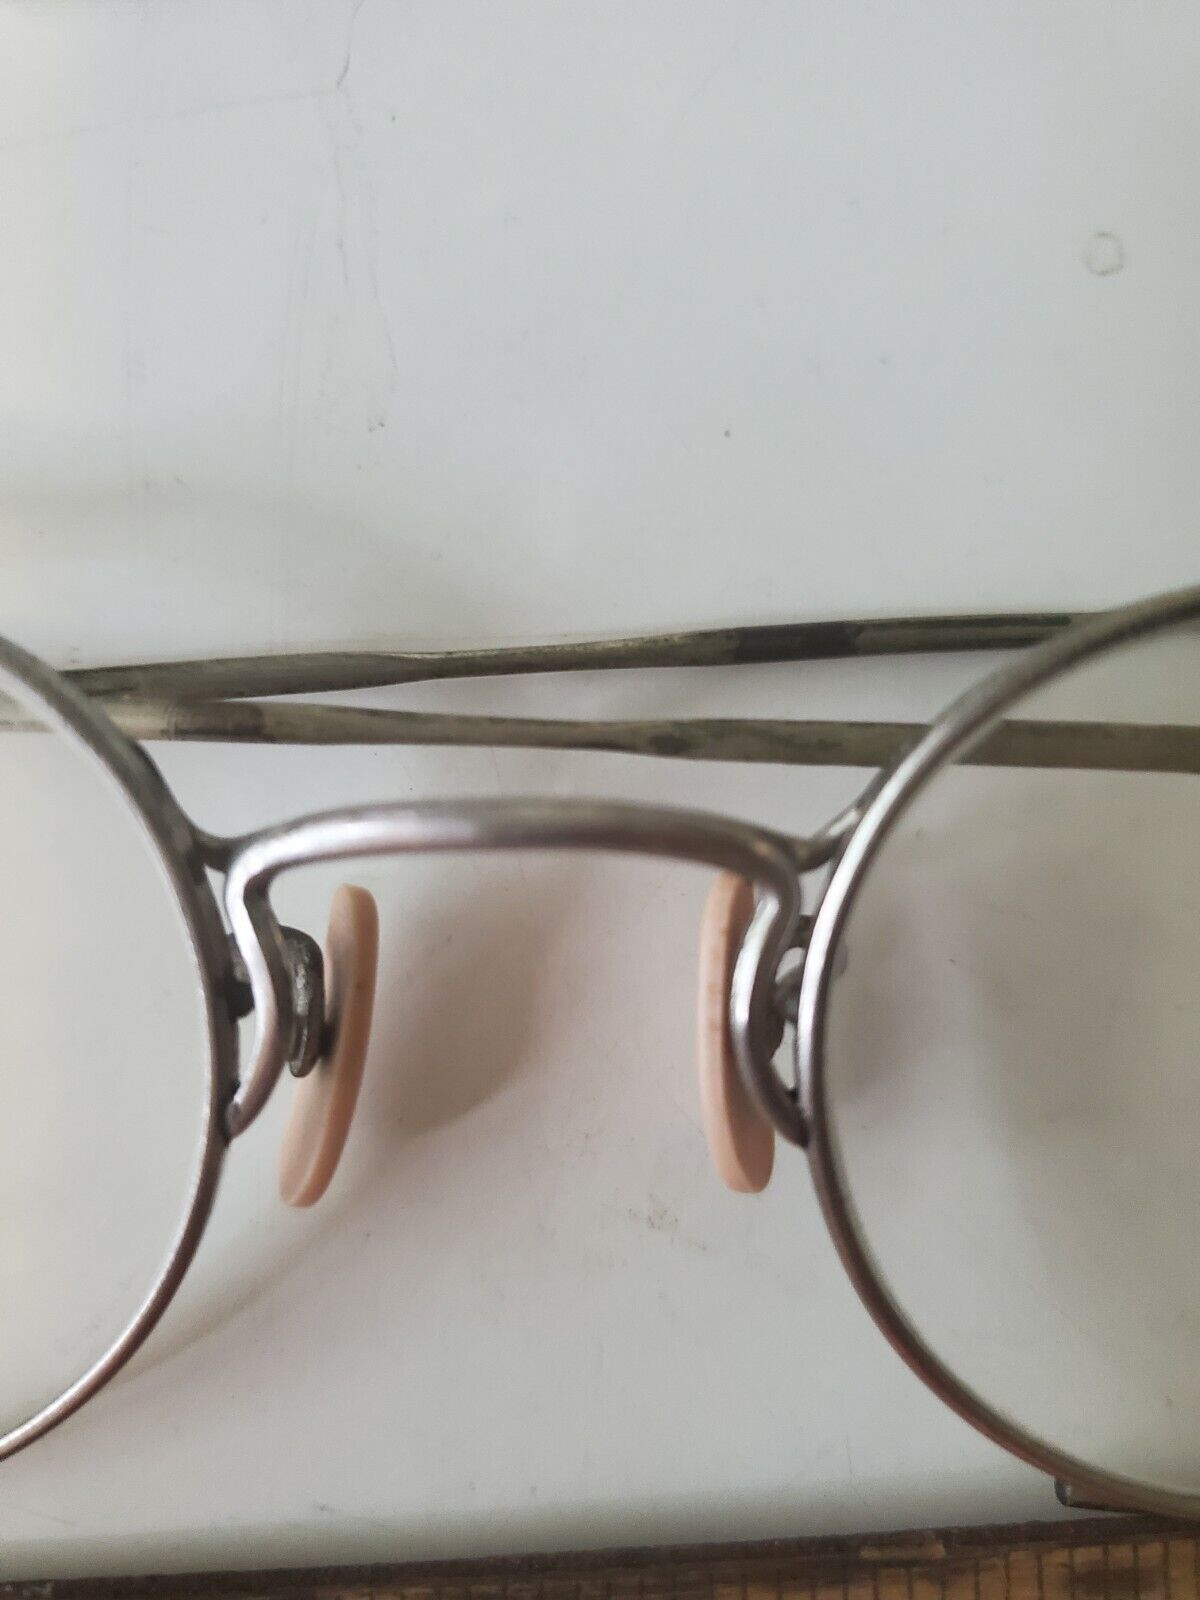 Antique Wire Rimmed Eye Glasses. Early 1900s - image 3